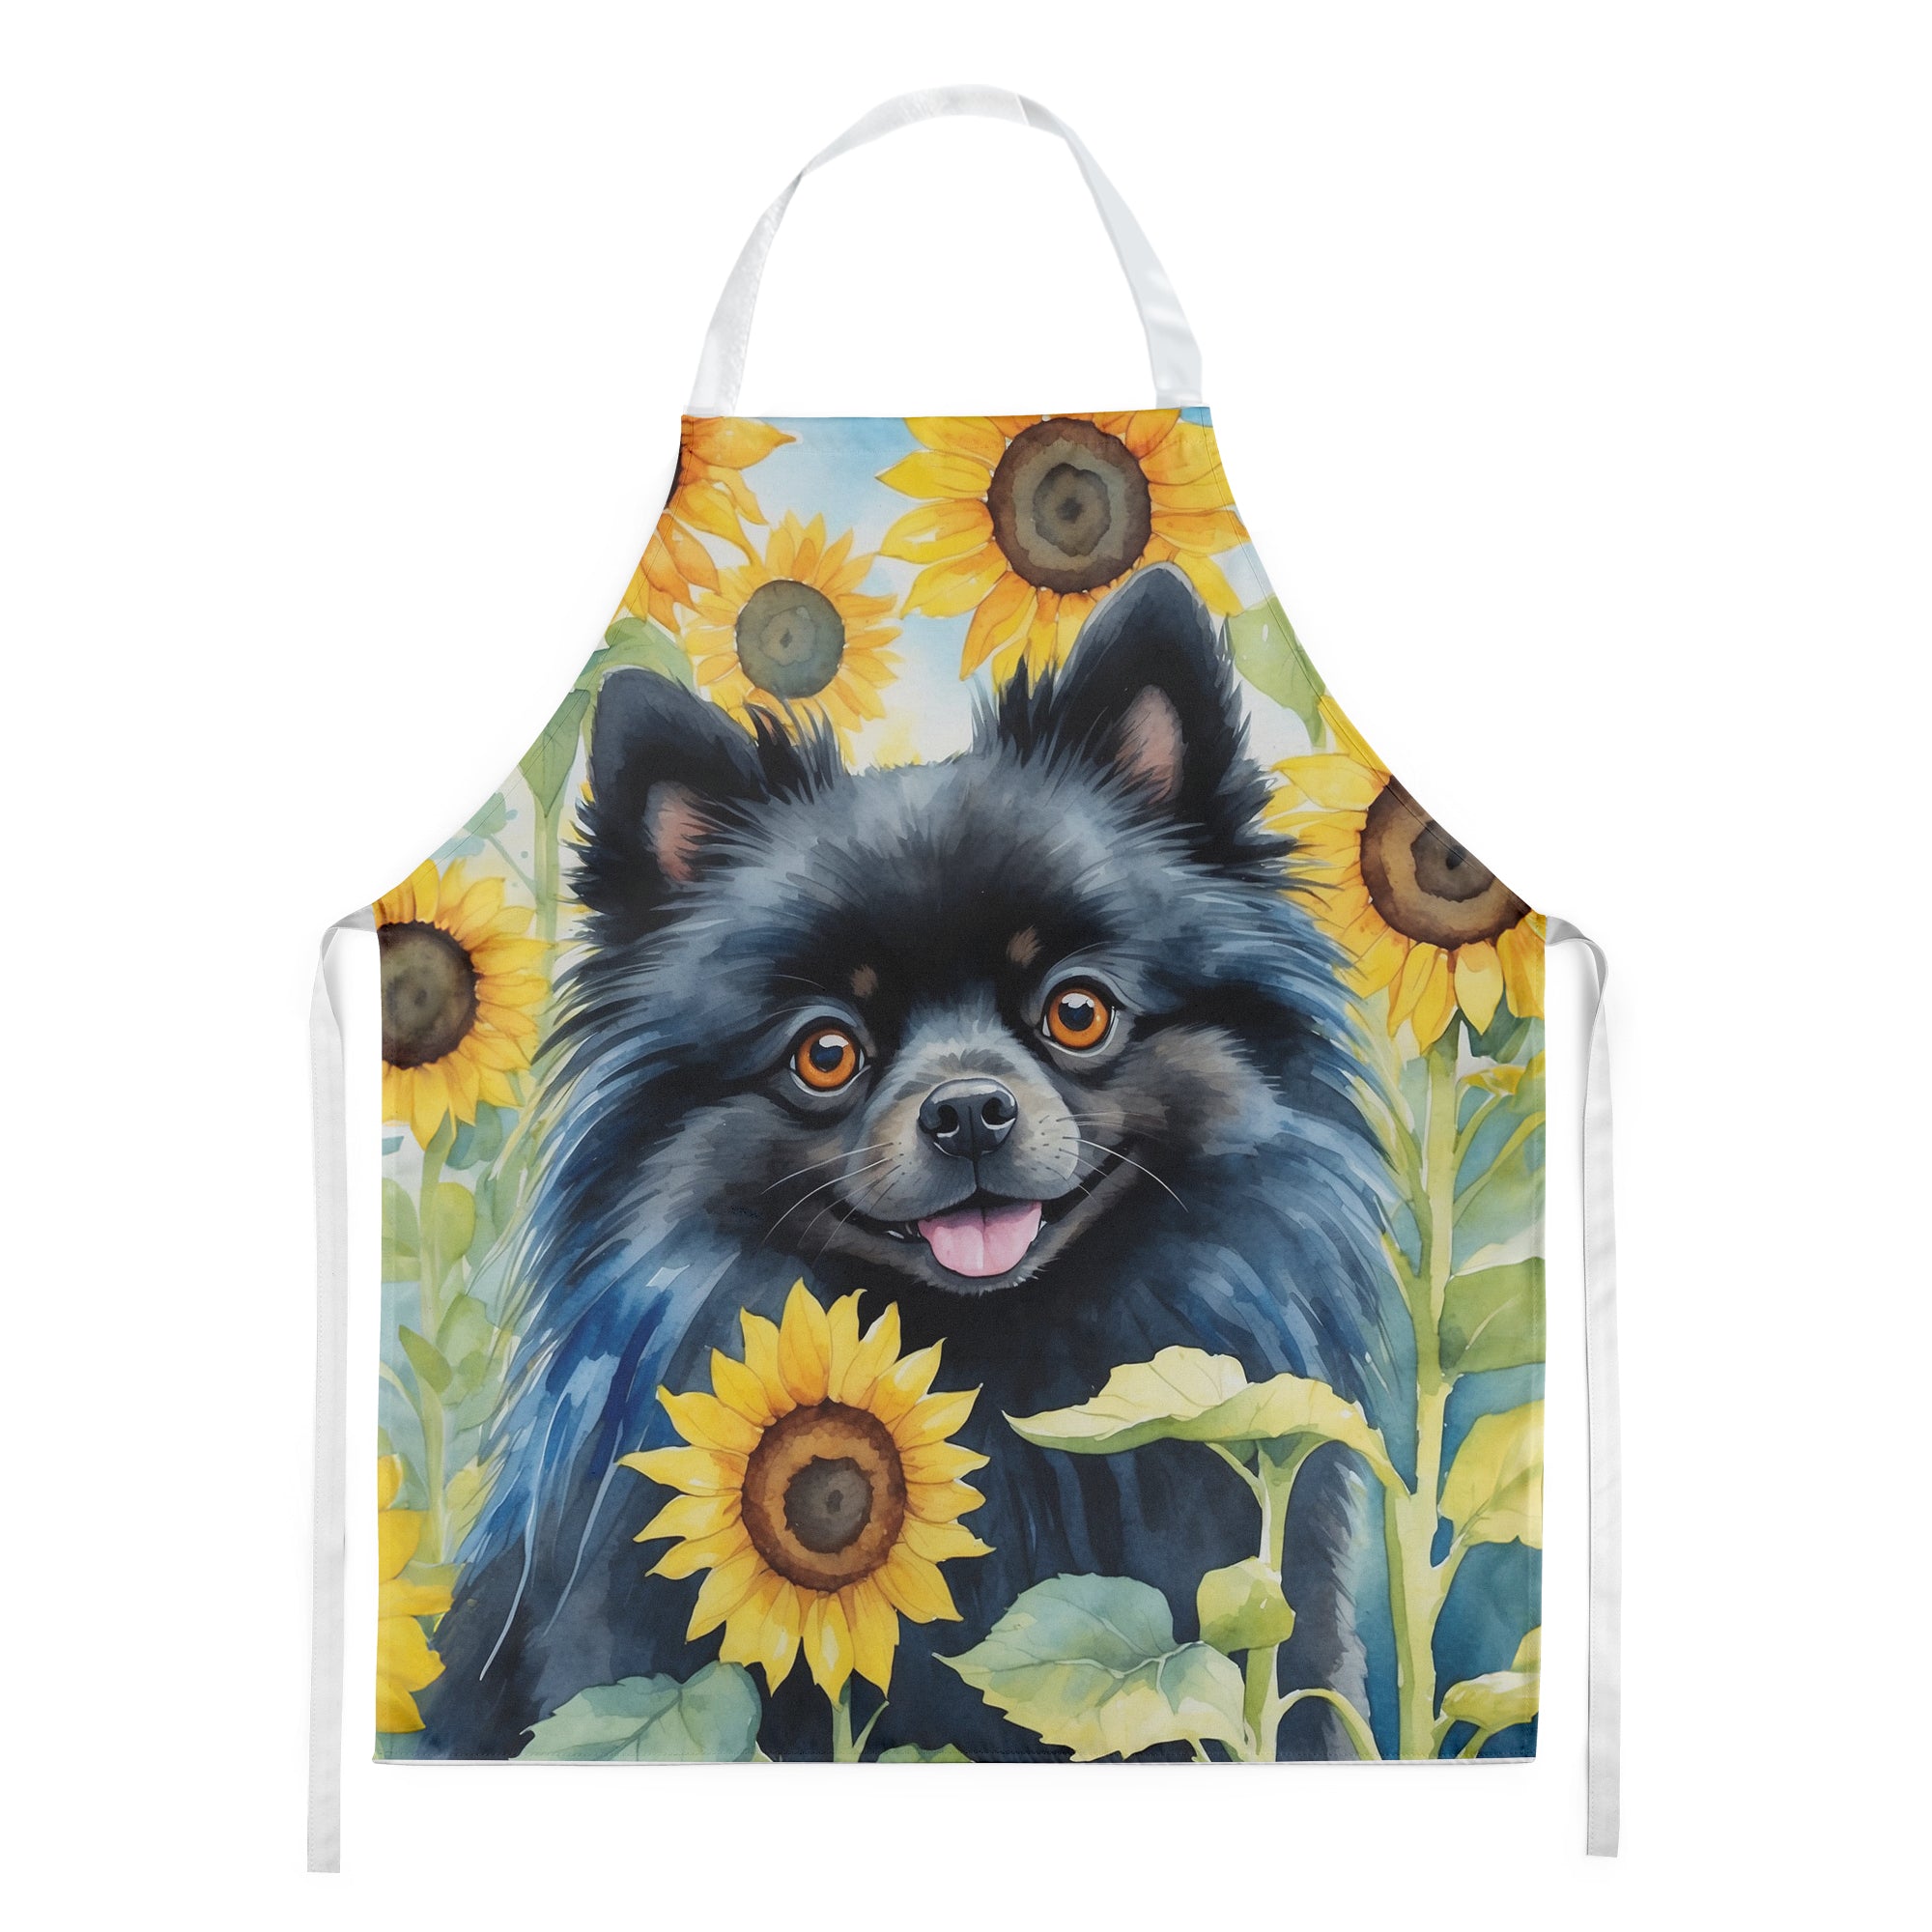 Buy this Pomeranian in Sunflowers Apron